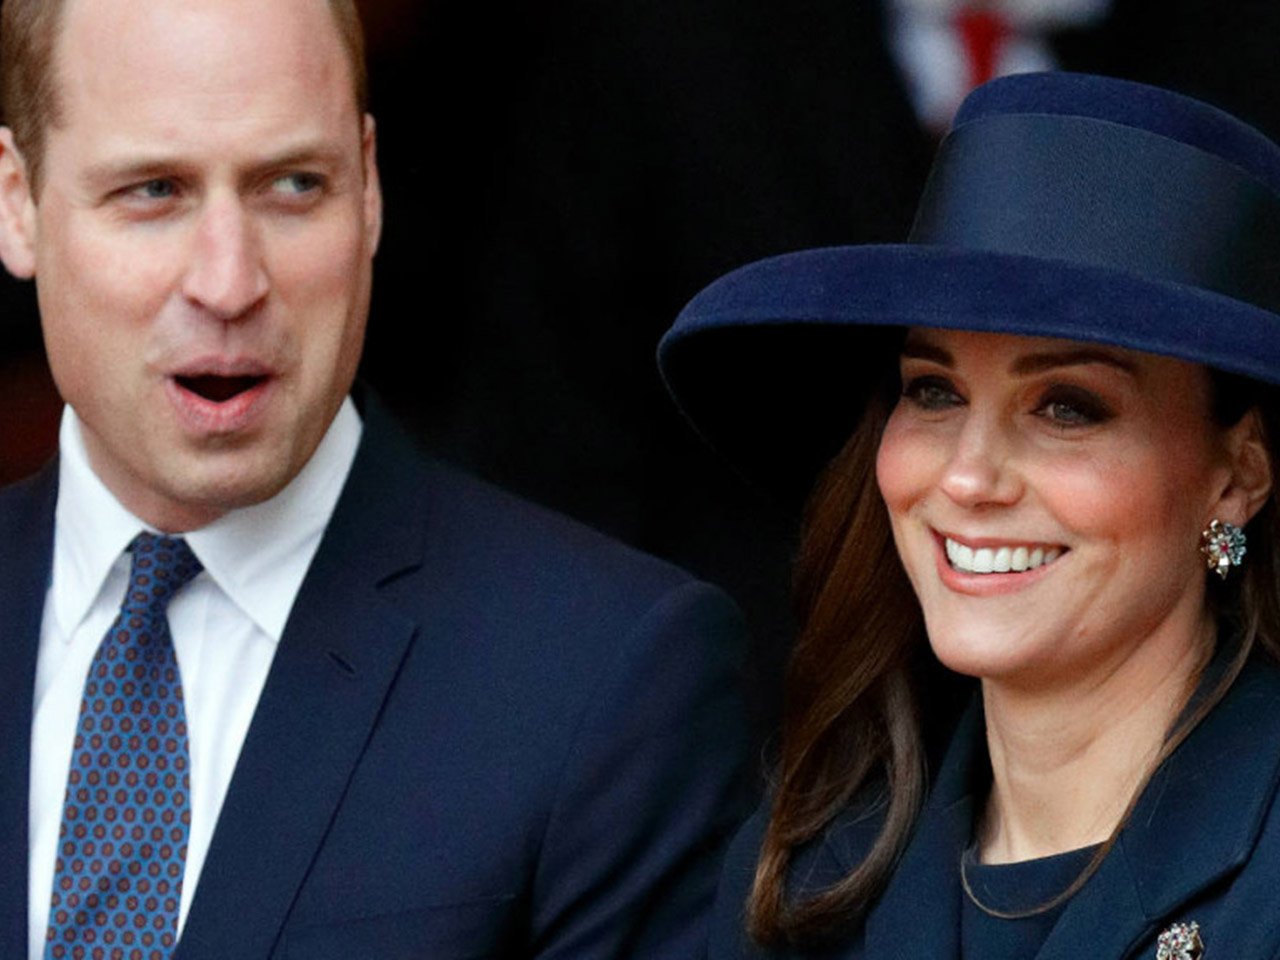 Oops! Did Prince William Just Reveal The Royal Baby’s Gender?